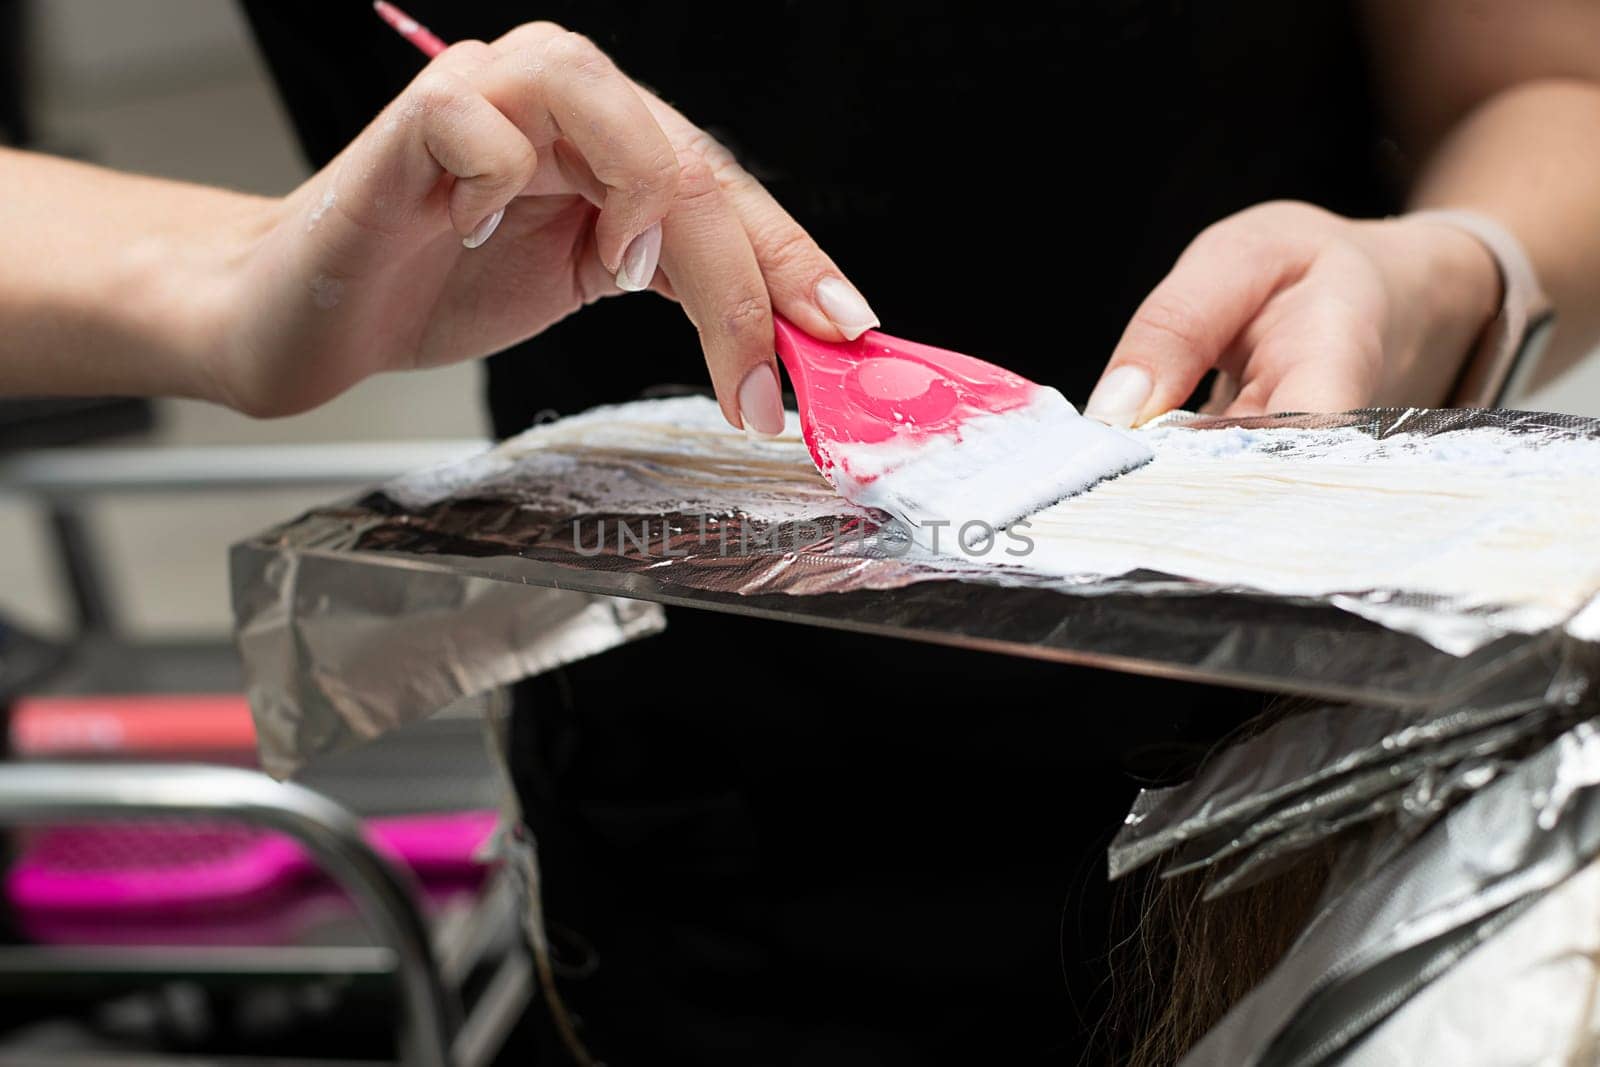 Beauty sphere. Hair coloring in a beauty salon. A master hairdresser-colorist dyes a client's brown hair blond. Apply lightening powder to hair onto foil using a pink brush. Close-up. by ketlit